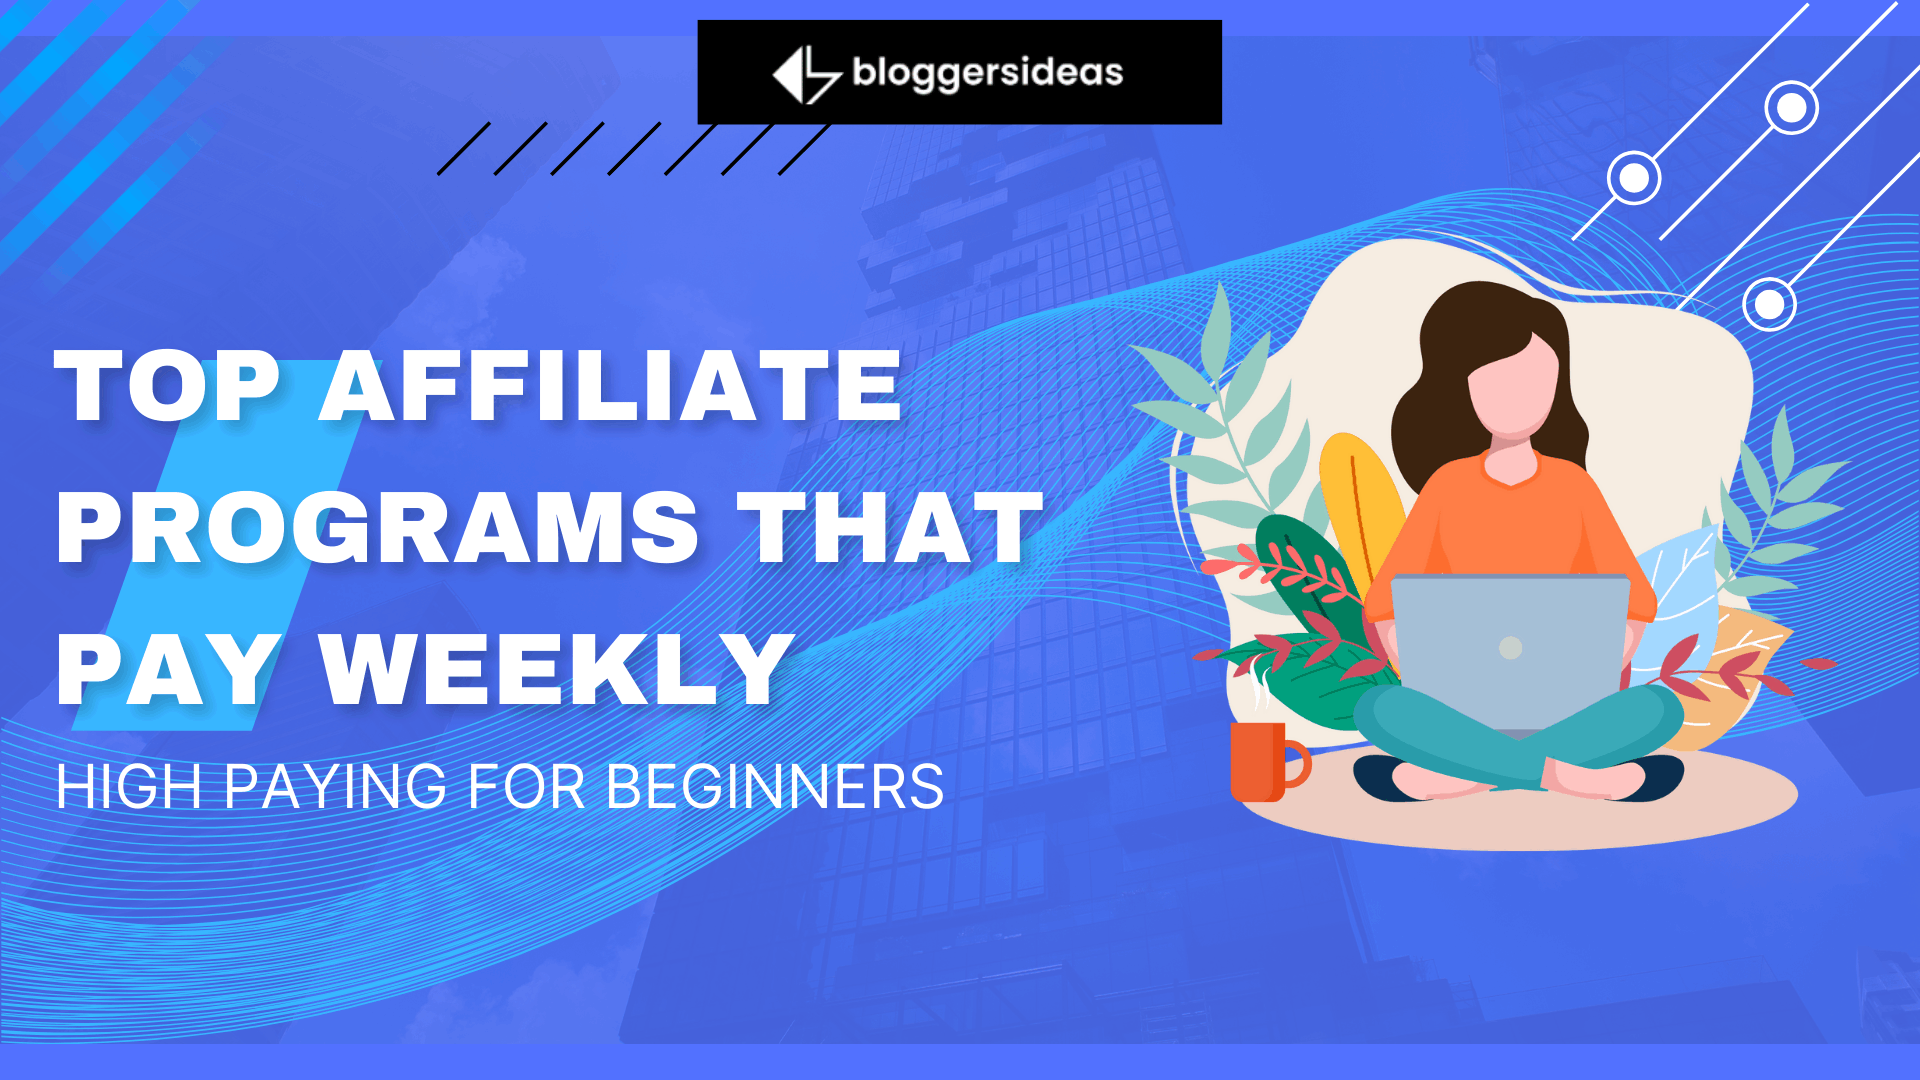 Top Affiliate Programs That Pay Weekly